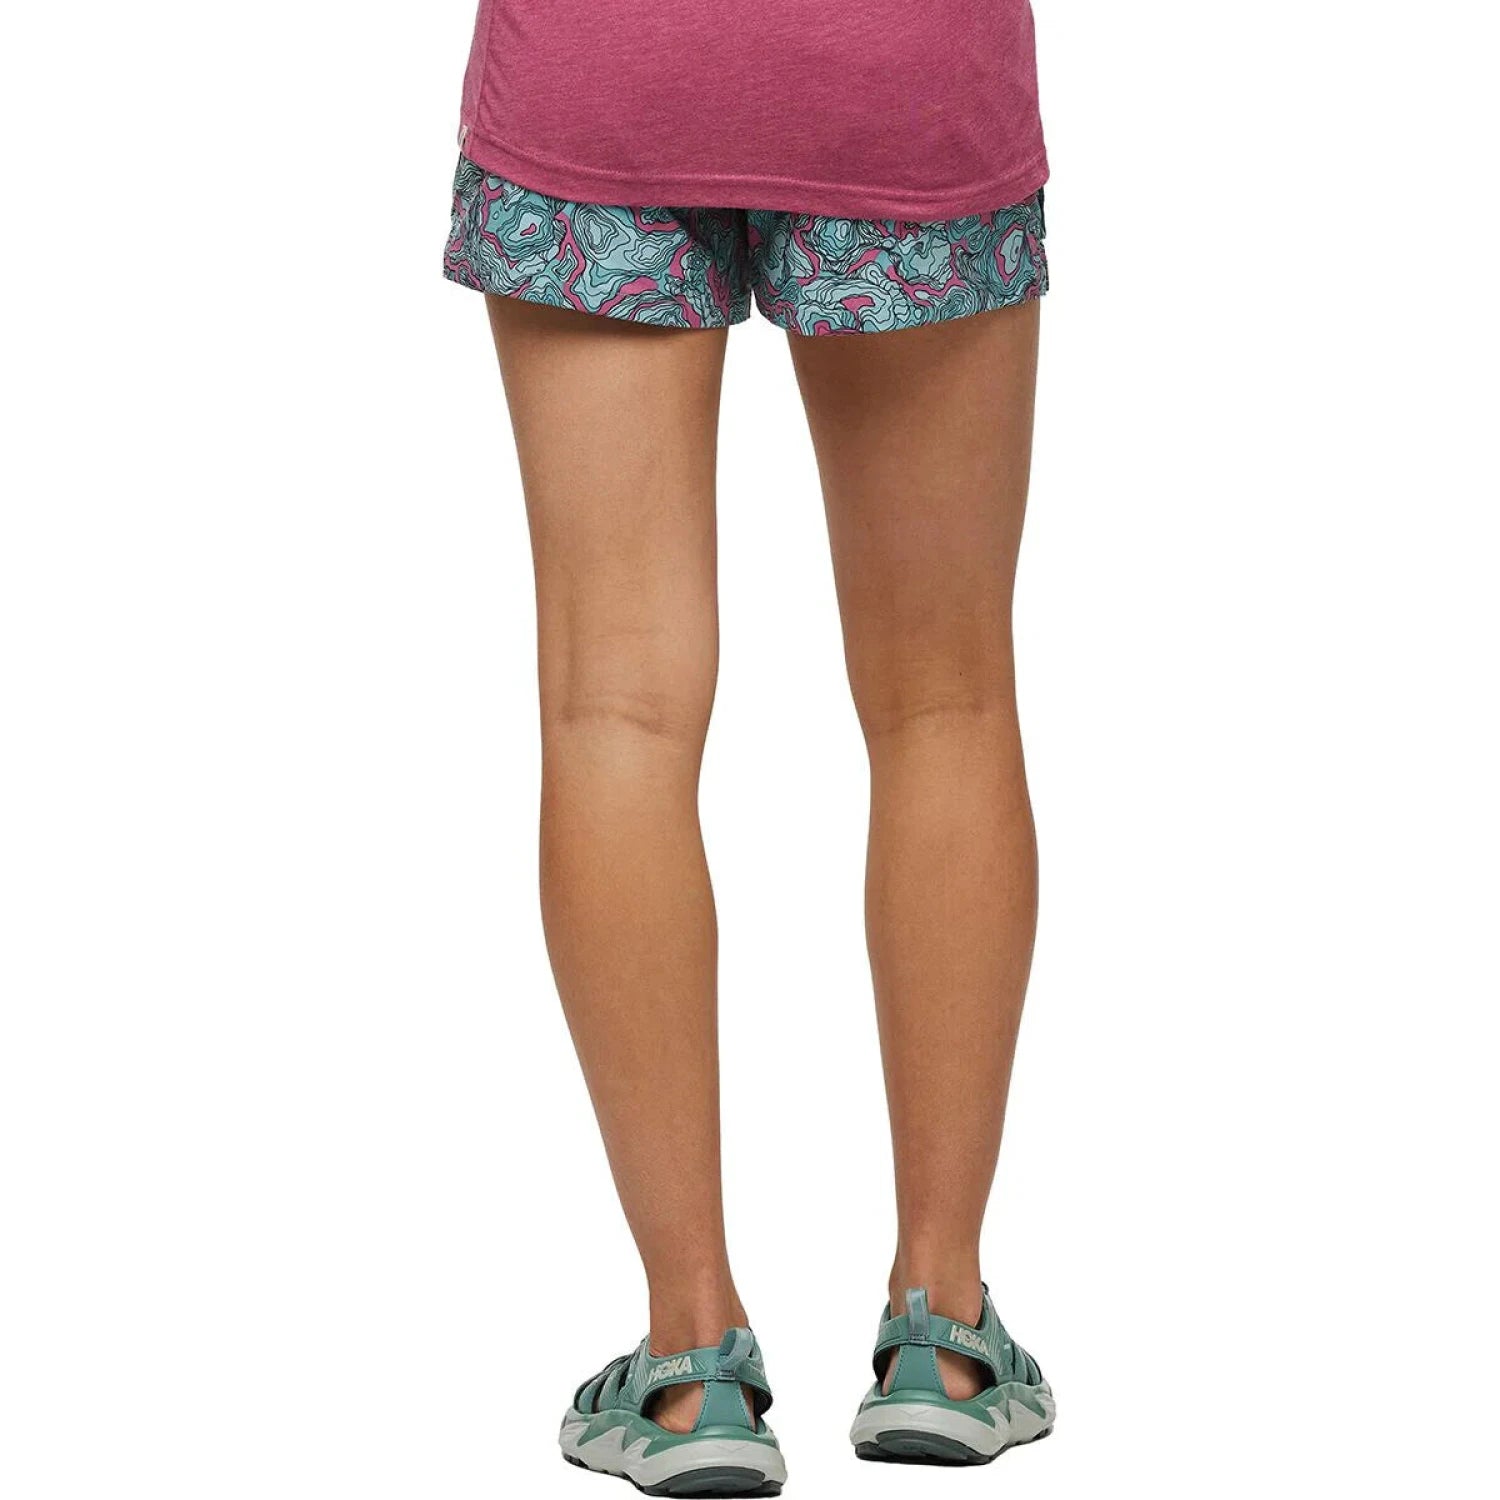 Cotopaxi Women's Brinco 3in Print Short shown in the Sangria/Coastal color option. Back view, model.